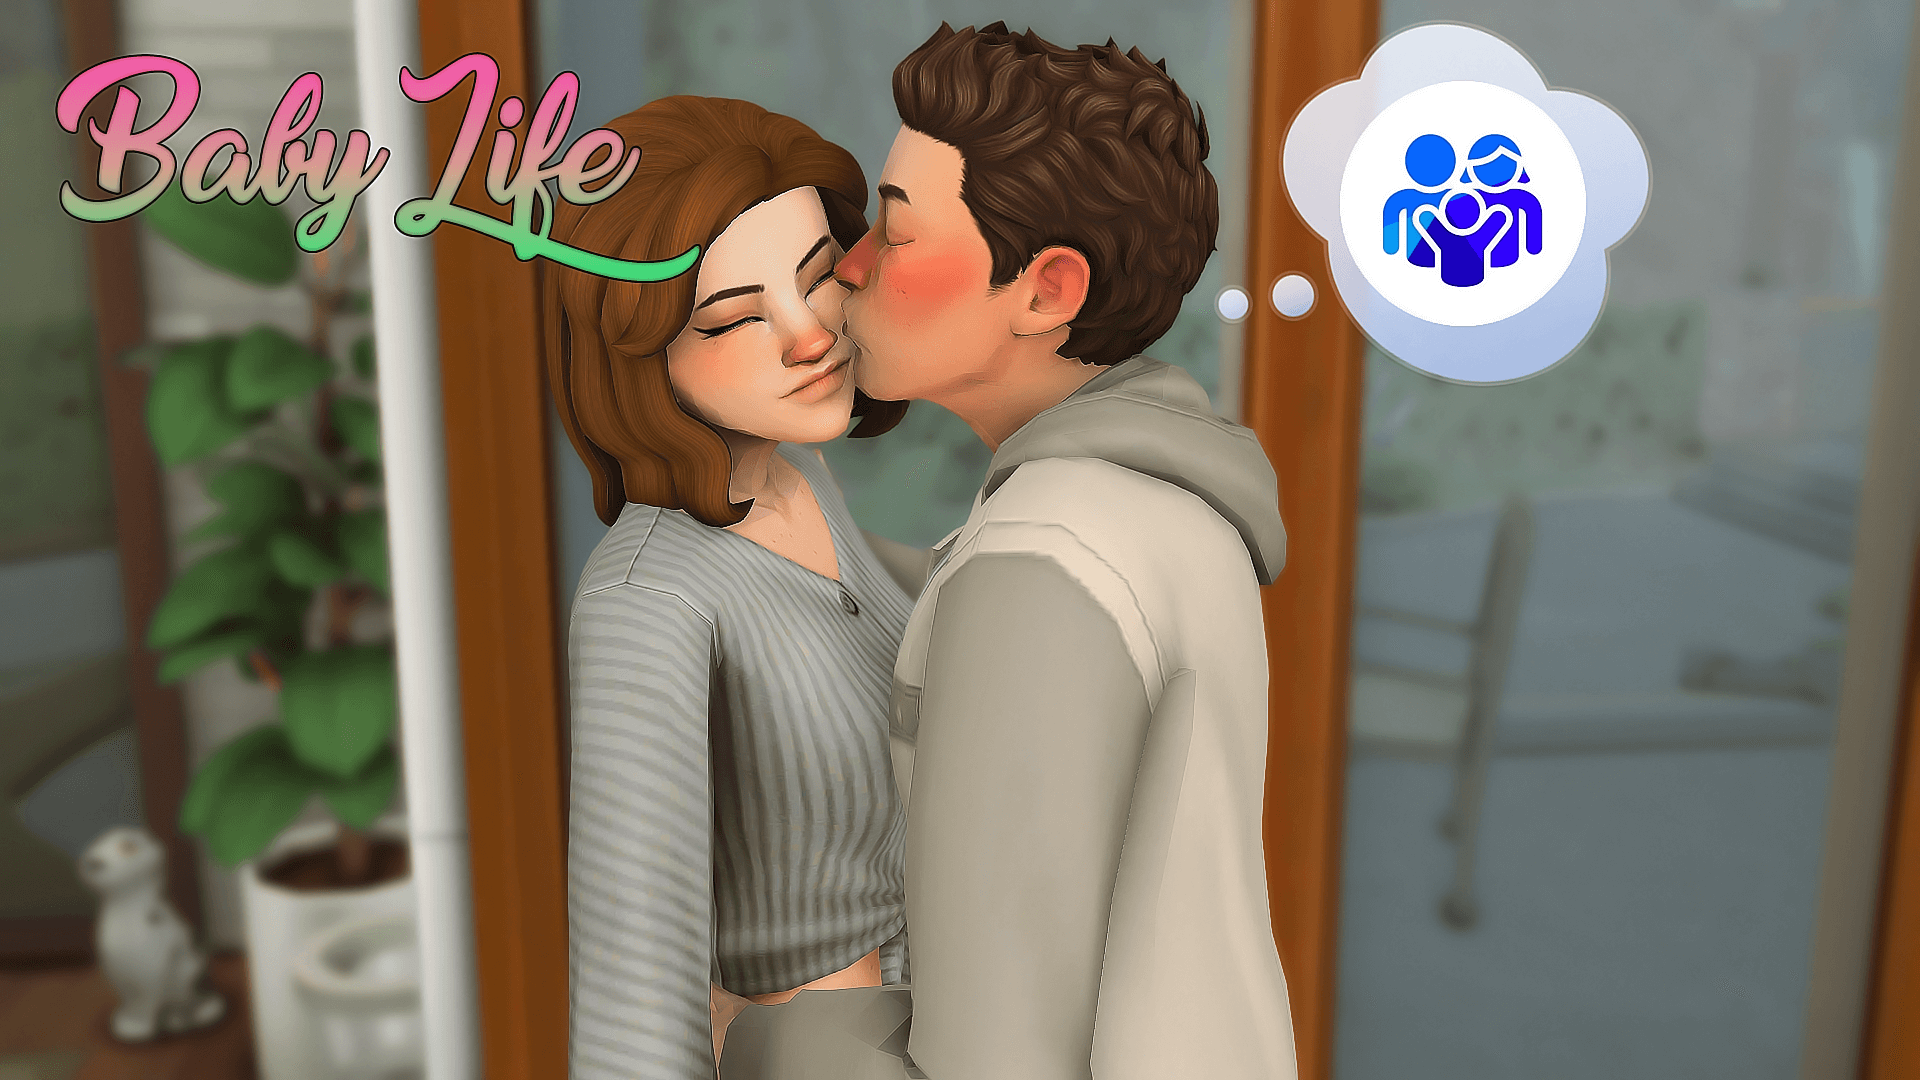 Whickedwhims русификатор. SIMS 4 children whickedwhims. SIMS 4 wickedwhims child. Симс 4 wickedwhims дети. SIMS 4 wickedwhims с детьми.